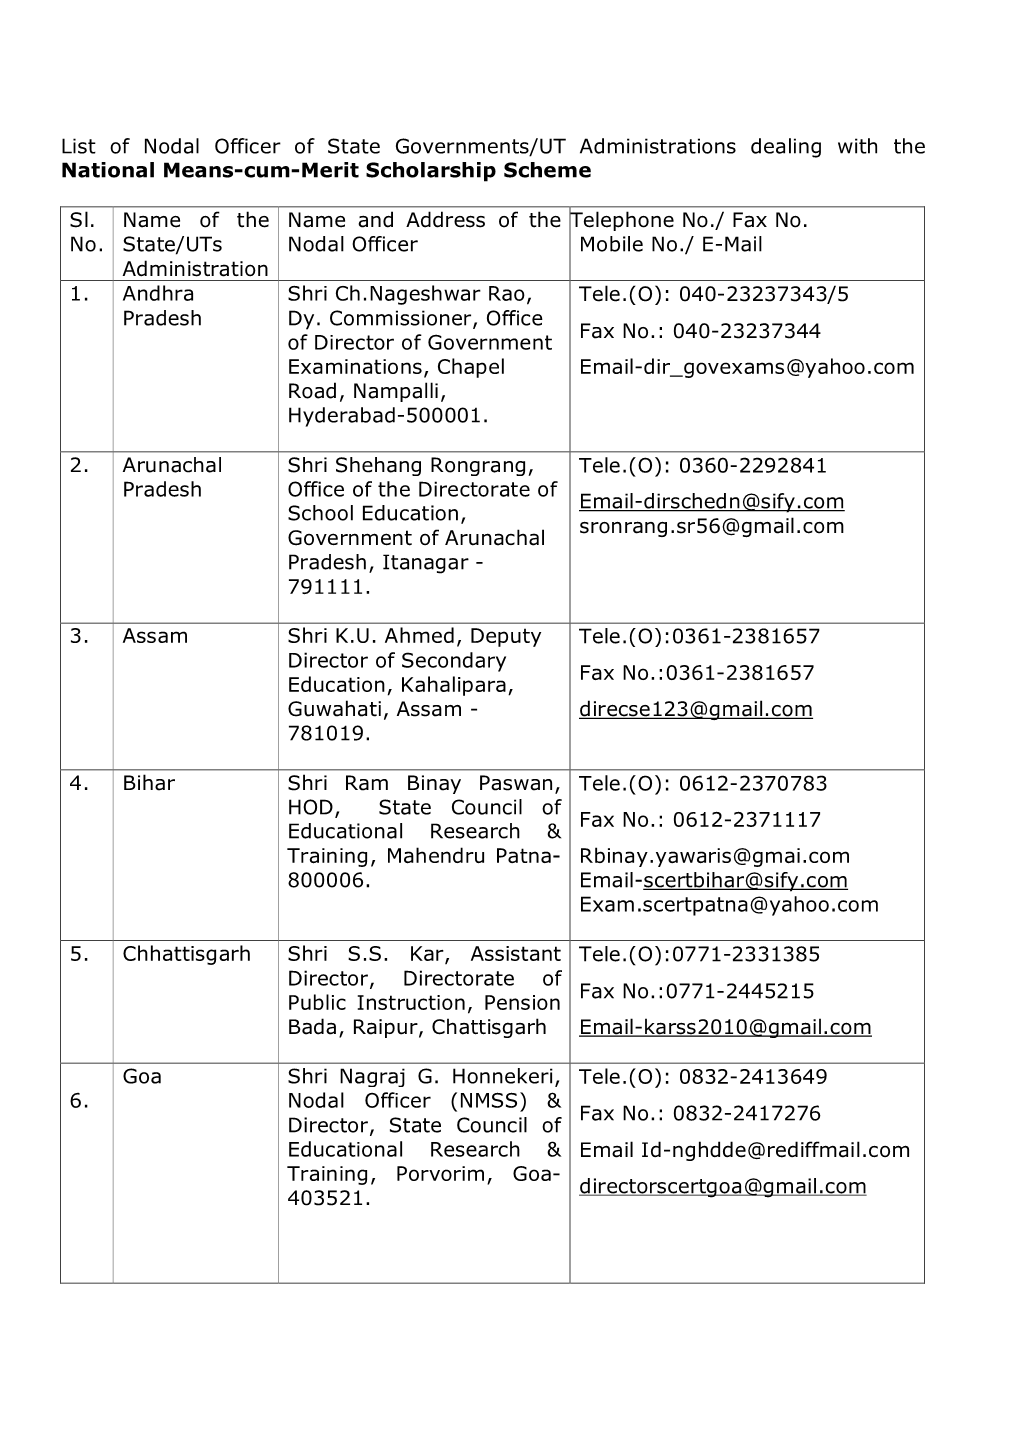 List of Nodal Officer of State Governments/UT Administrations Dealing with the National Means-Cum-Merit Scholarship Scheme